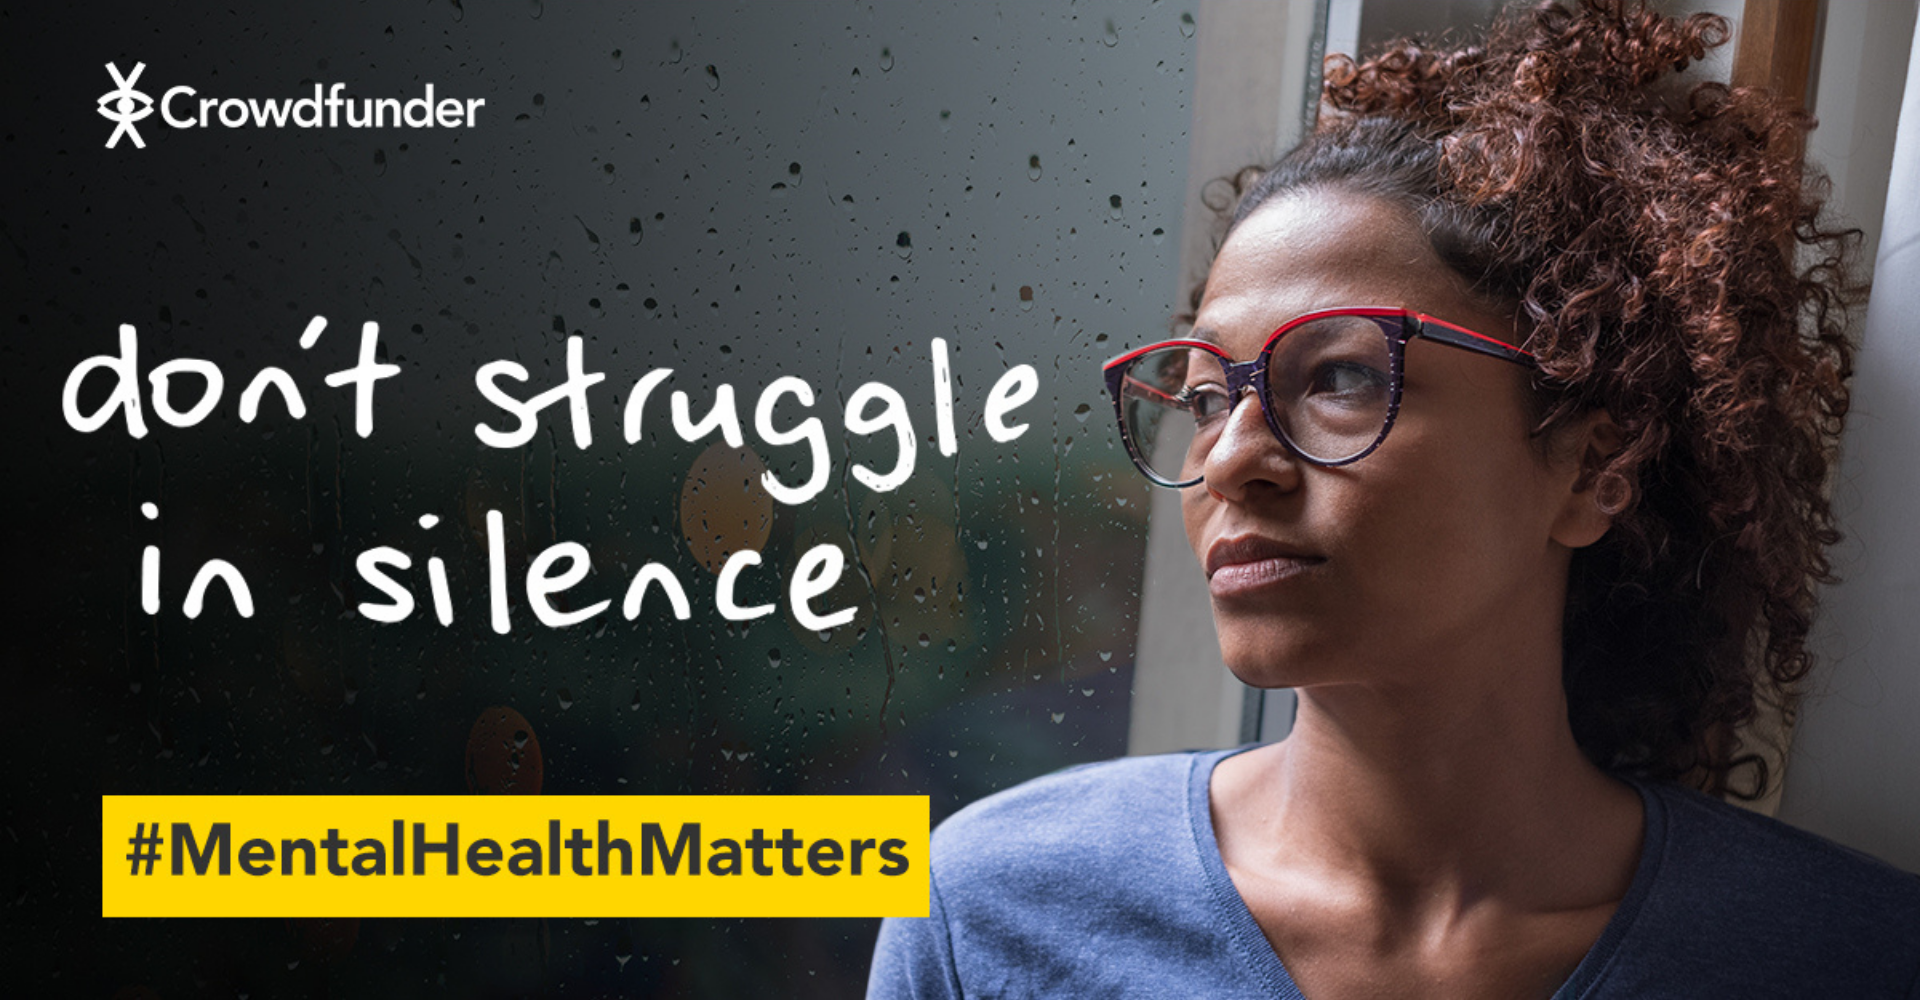 Mental Health Matters – Join our national crowdfunding campaign today for a brighter tomorrow